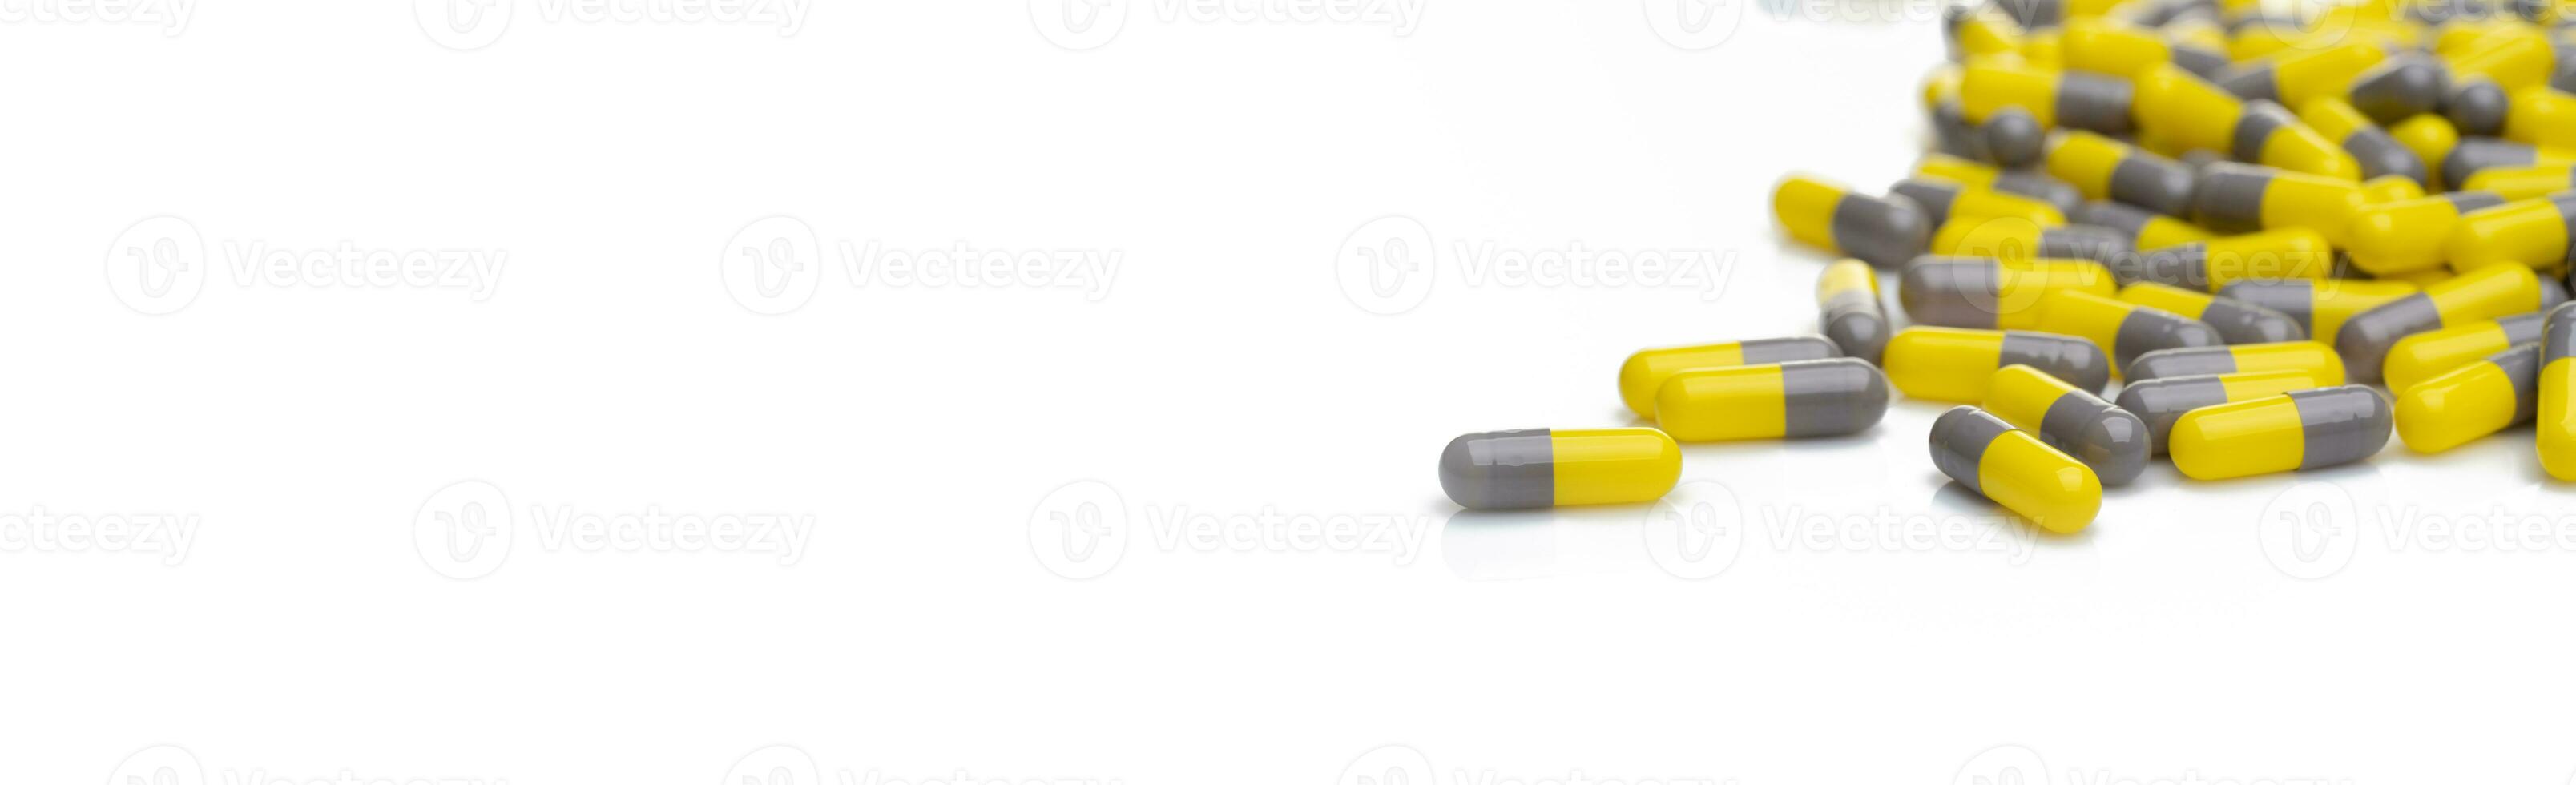 Yellow and gray probiotic capsule pill on white background. Probiotic supplement. Gut health. Dietary supplements. Probiotics for a healthy gut. Lactobacillus acidophilus and Bifidobacterium animalis. photo